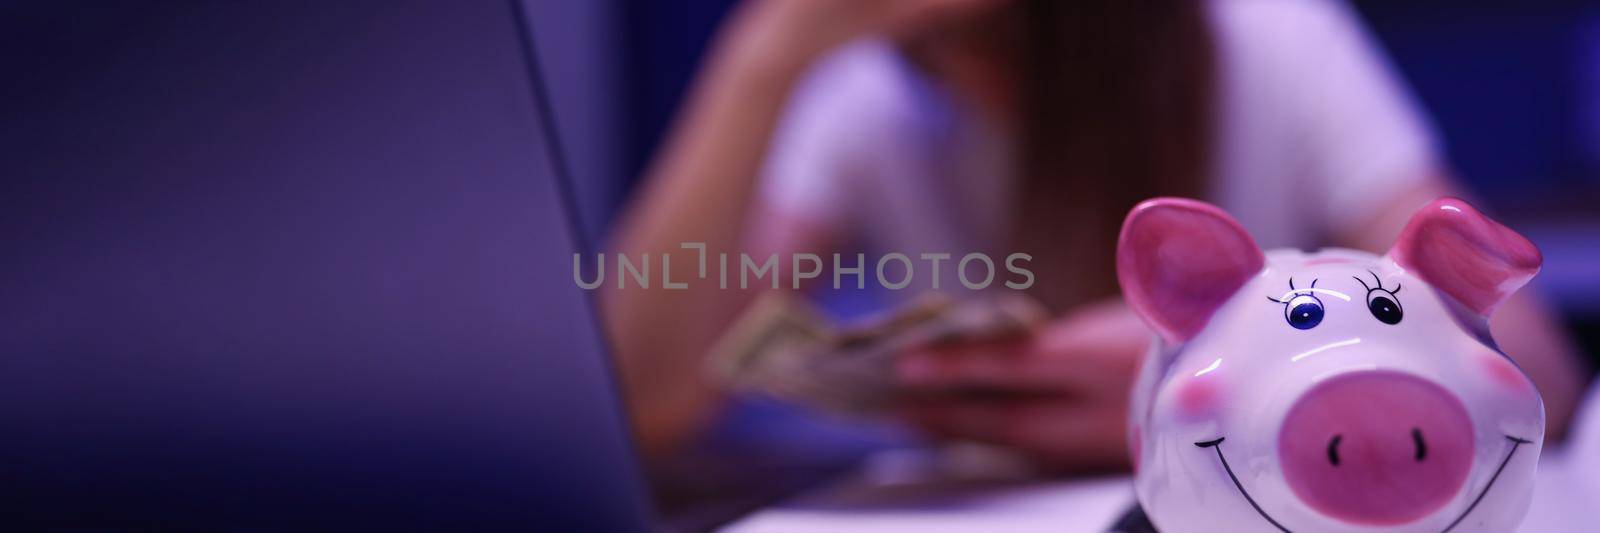 Close-up of piggy bank on desk, broken woman count money on background. Saving up for tomorrow, pay bills, invest. Finance, planning budget, economy, family banking concept. Blurred background